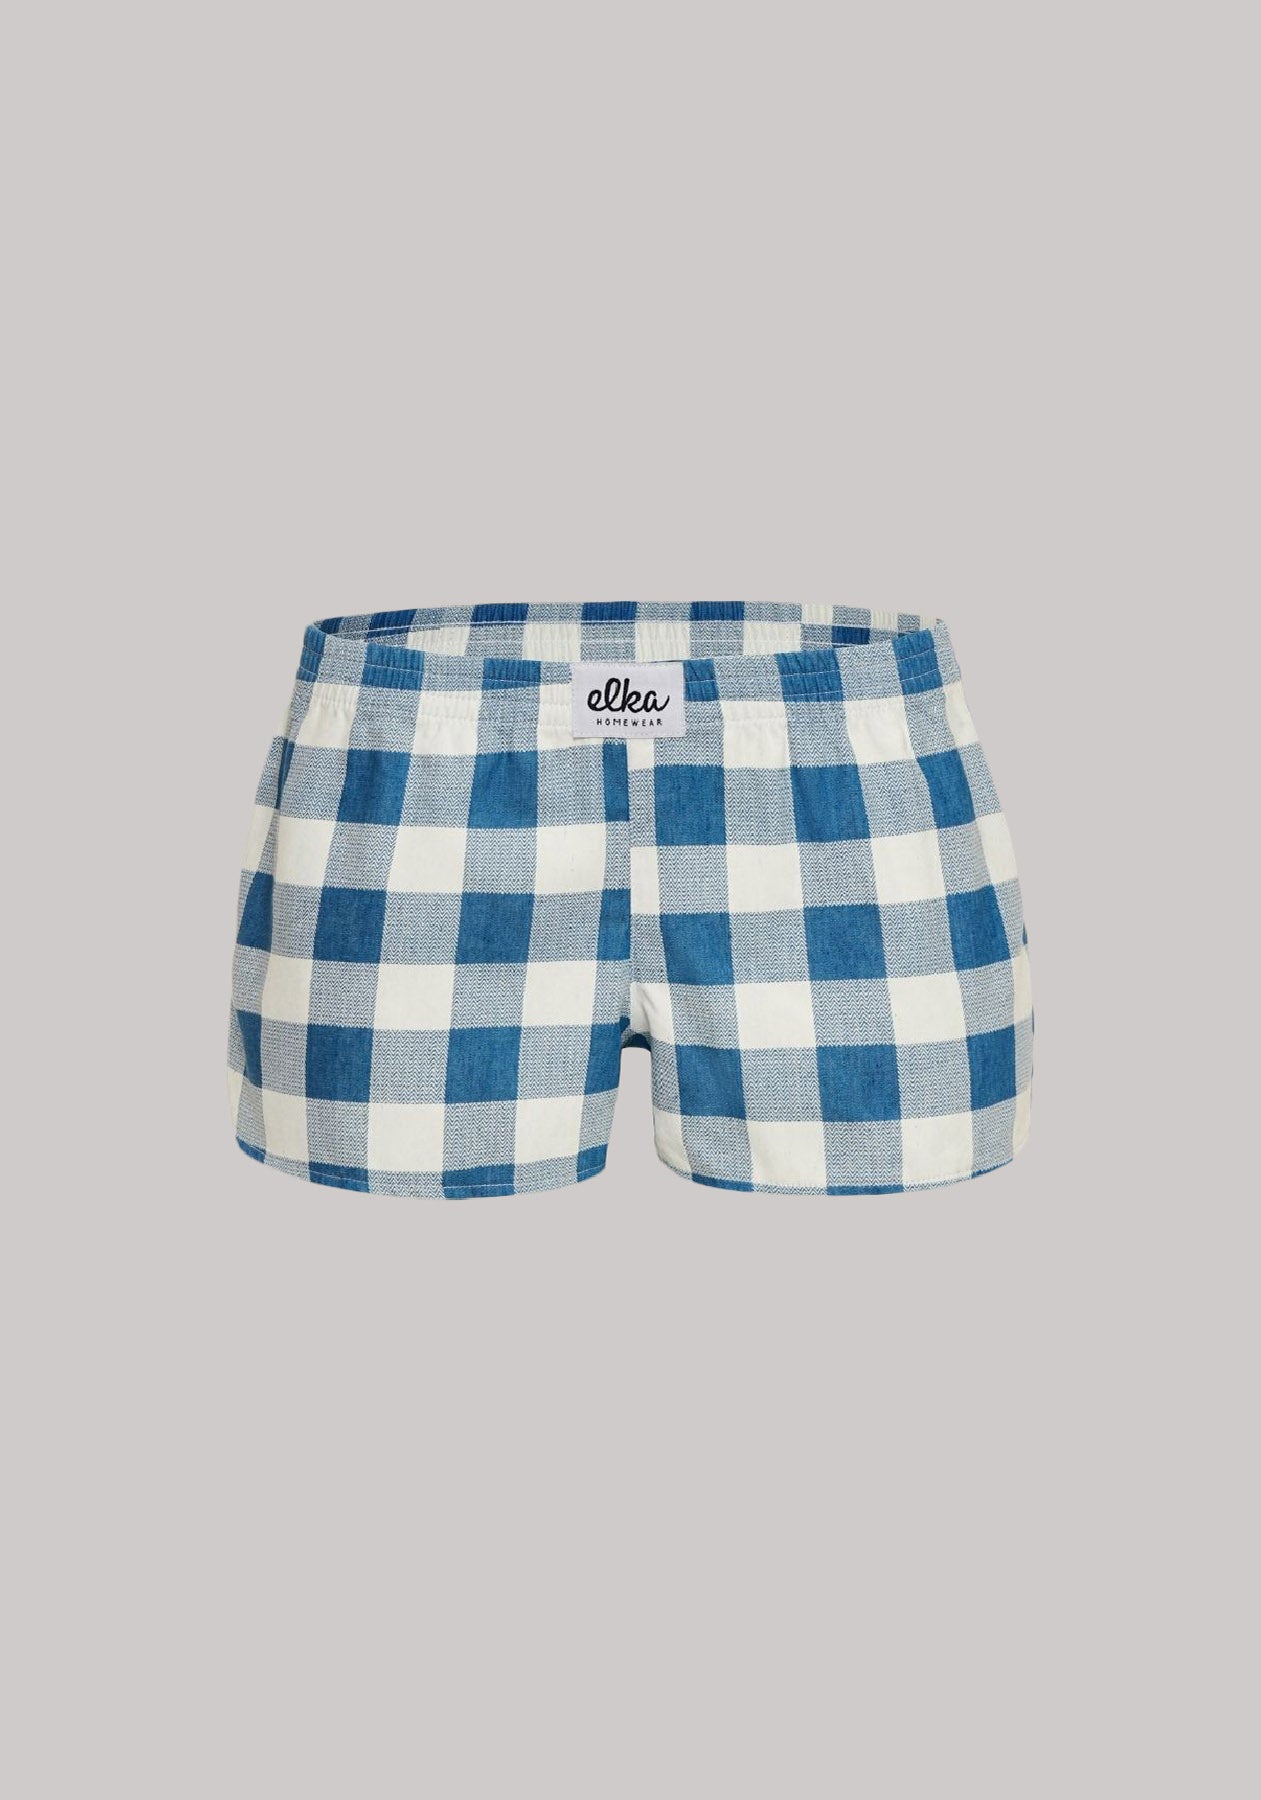 Women's shorts Checked blue